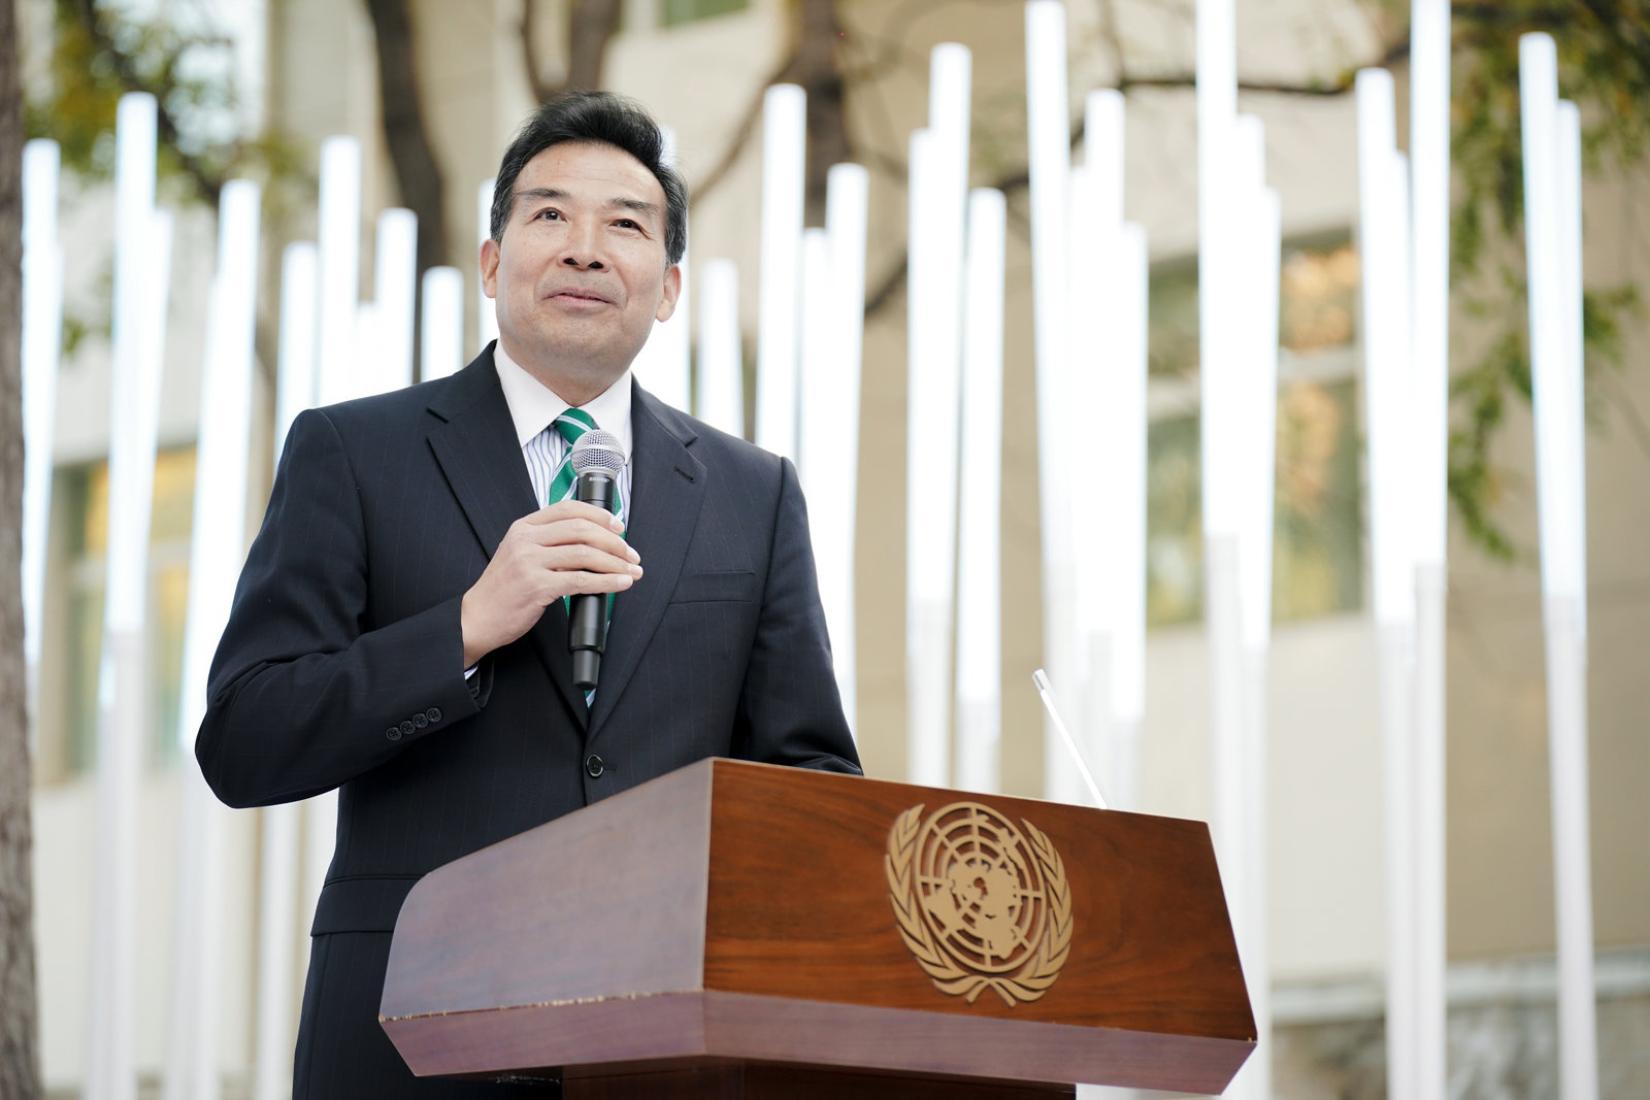 Chairman of the China International Development Cooperation Agency, Luo Zhaohui speaking at UN Day event 2021